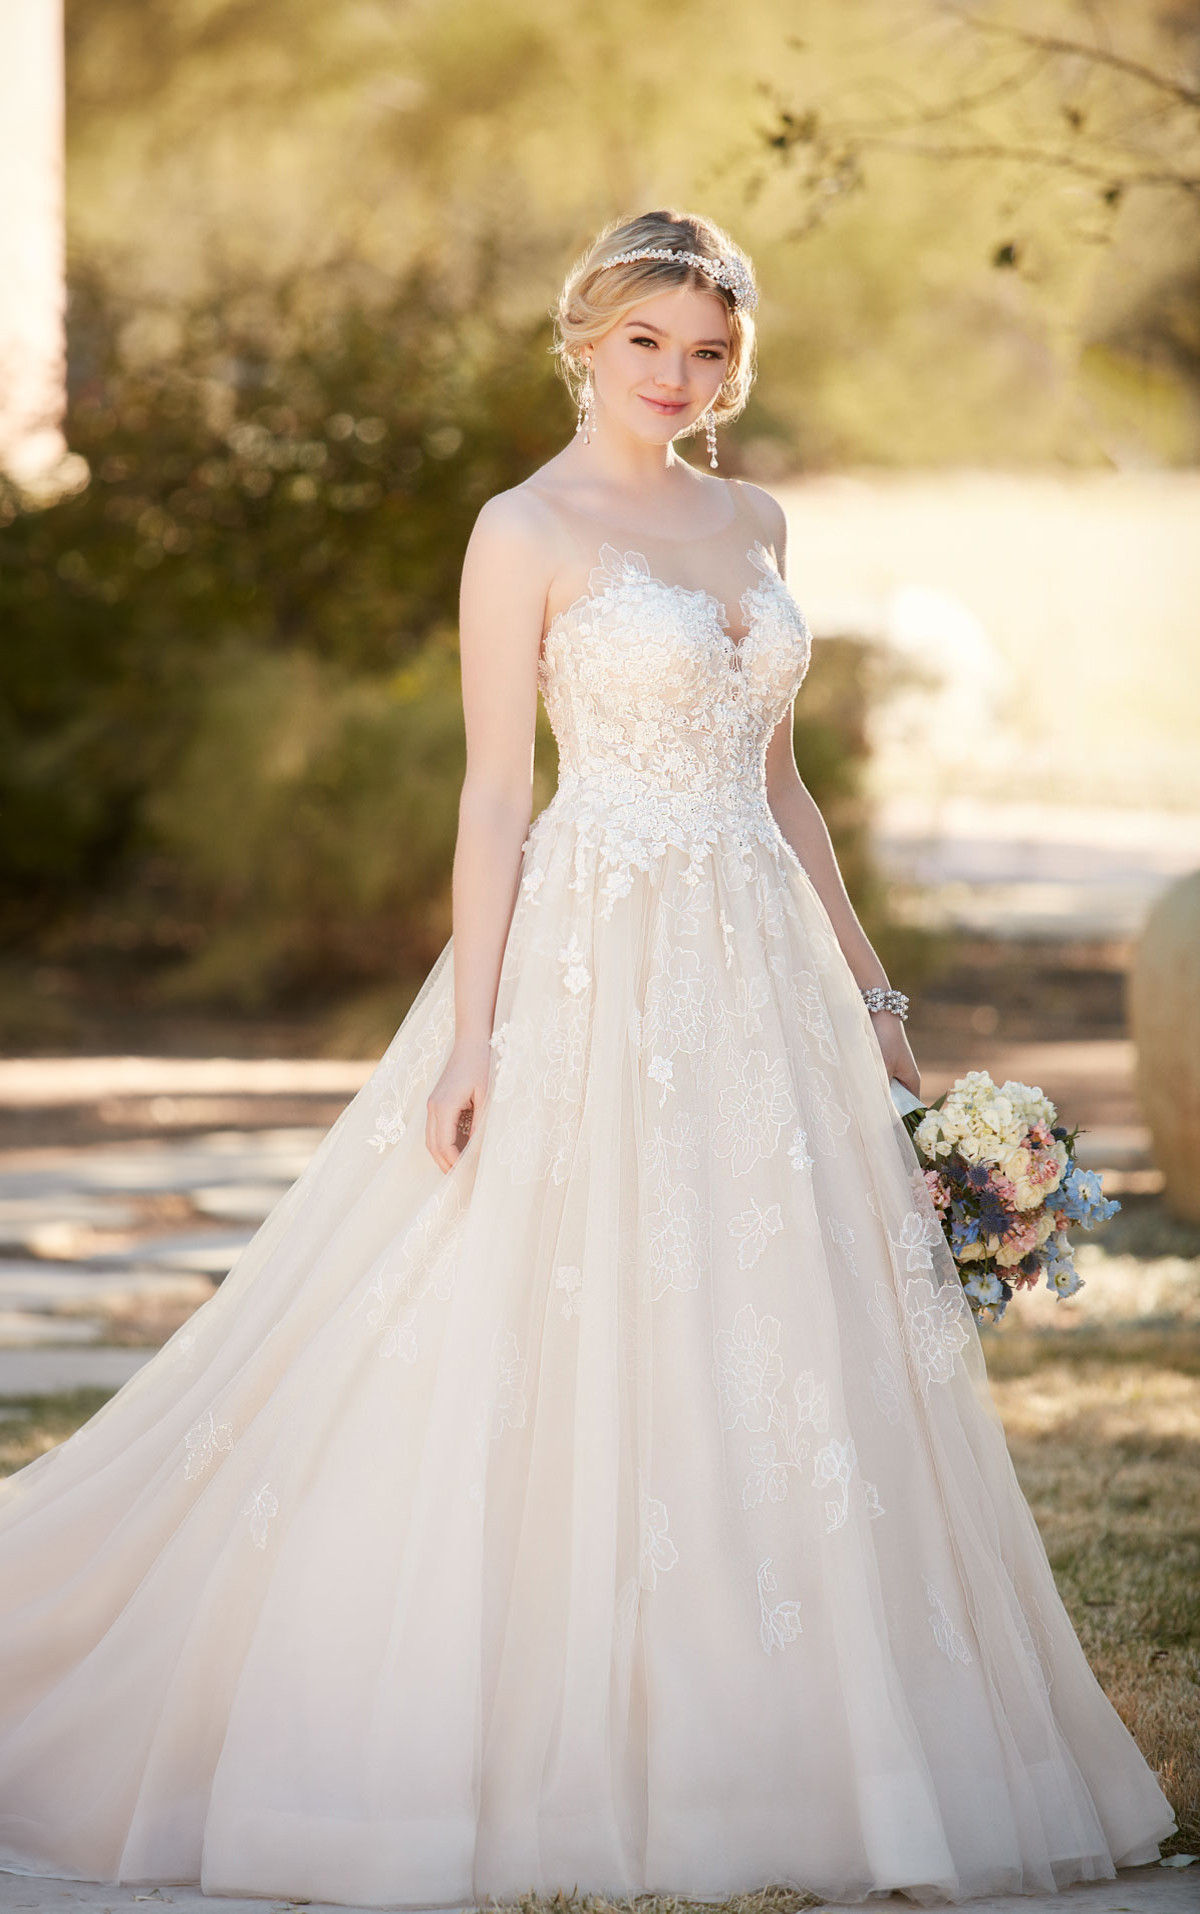 Ball Gown Wedding Dresses
 Ball Gown Wedding Dress with Tulle Skirt